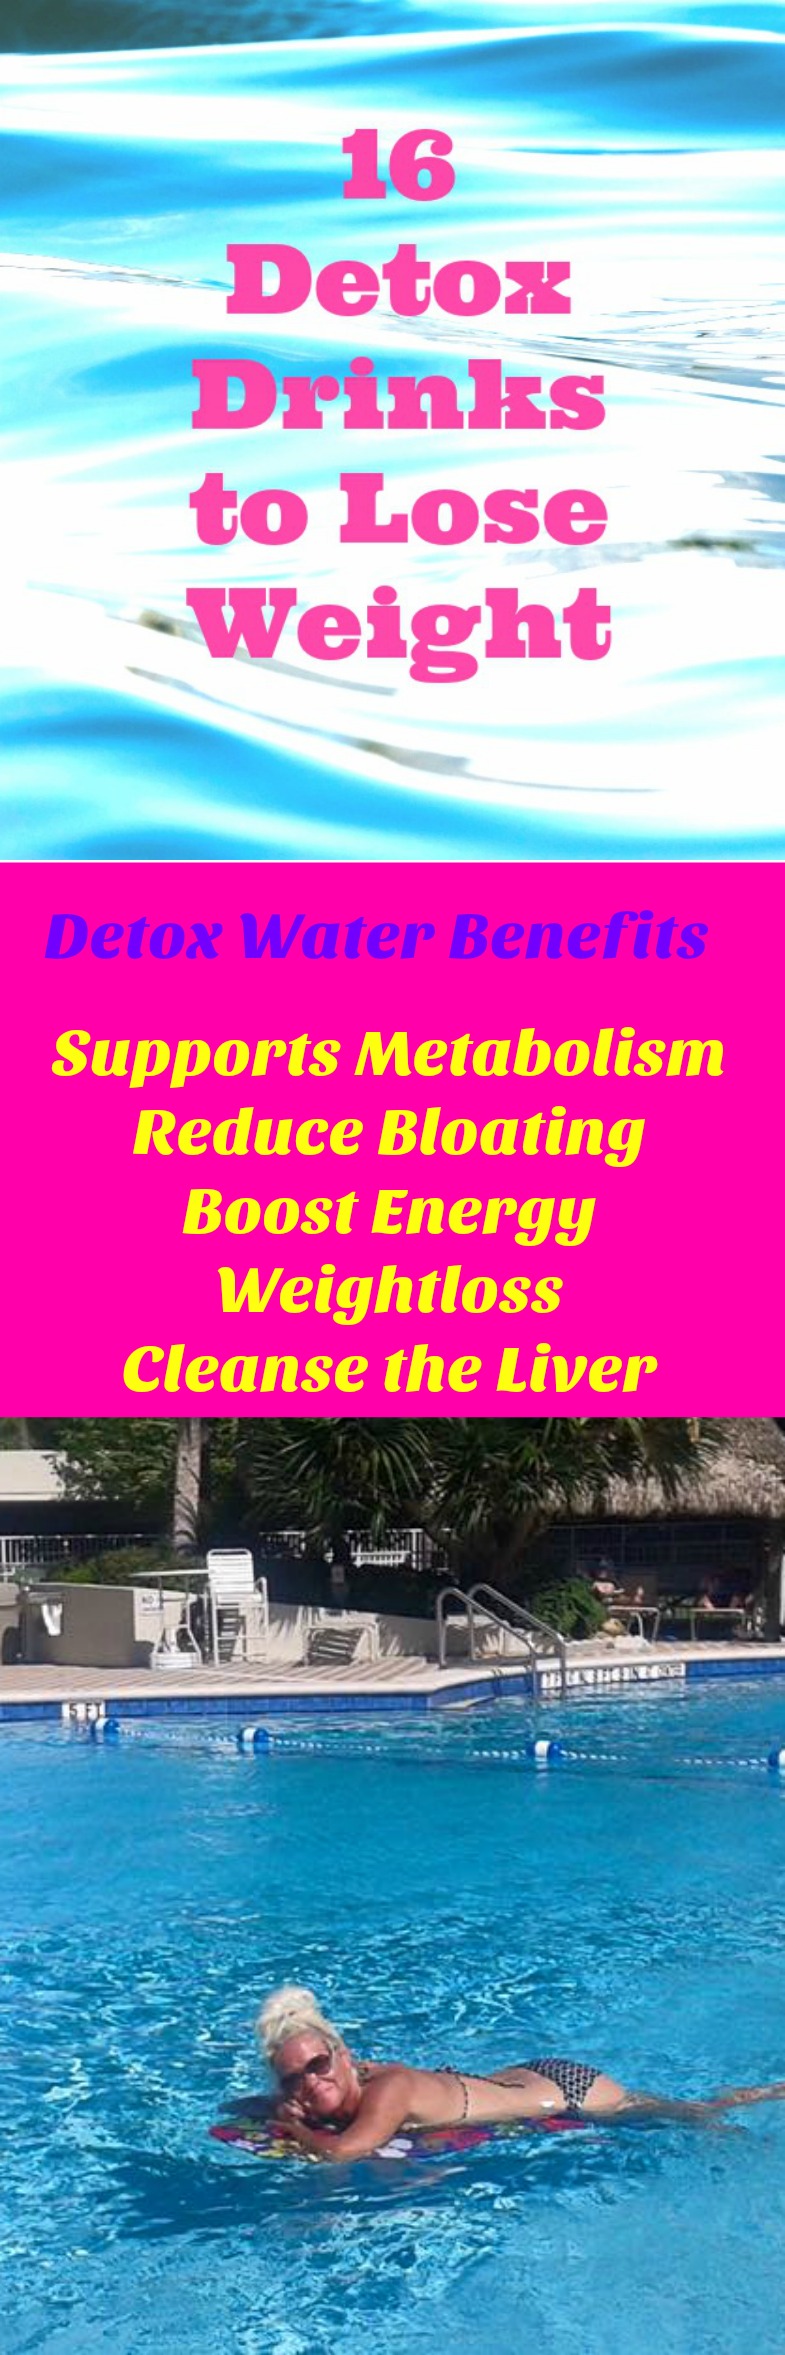 Detox water will help with weightloss and help relive bloating, help with constipation, reduce bloating, boost energy, cleanse your system and lose weight.